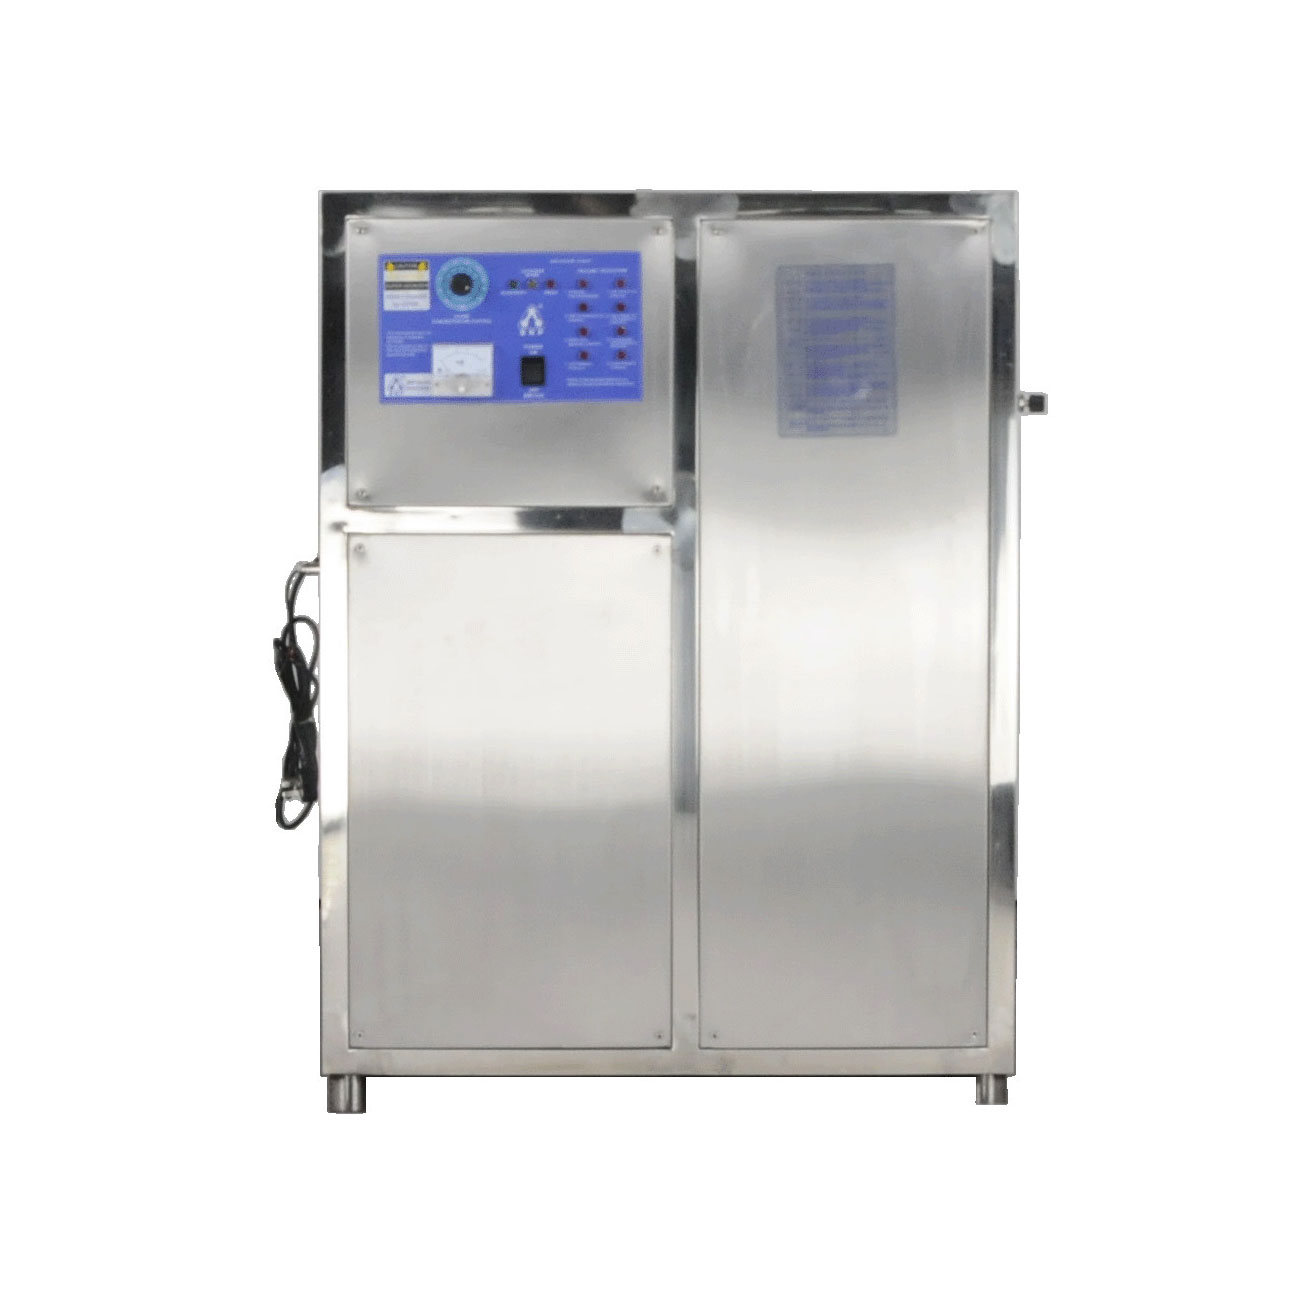 Professional Design Ozonator For Water Disinfection - Reliable Supplier China BNP SOZ-YW-200G Industrial Oxygen-Enriched Ozone Generator for Public Place Air Purifier and O3 Sterilizer Water Disin...